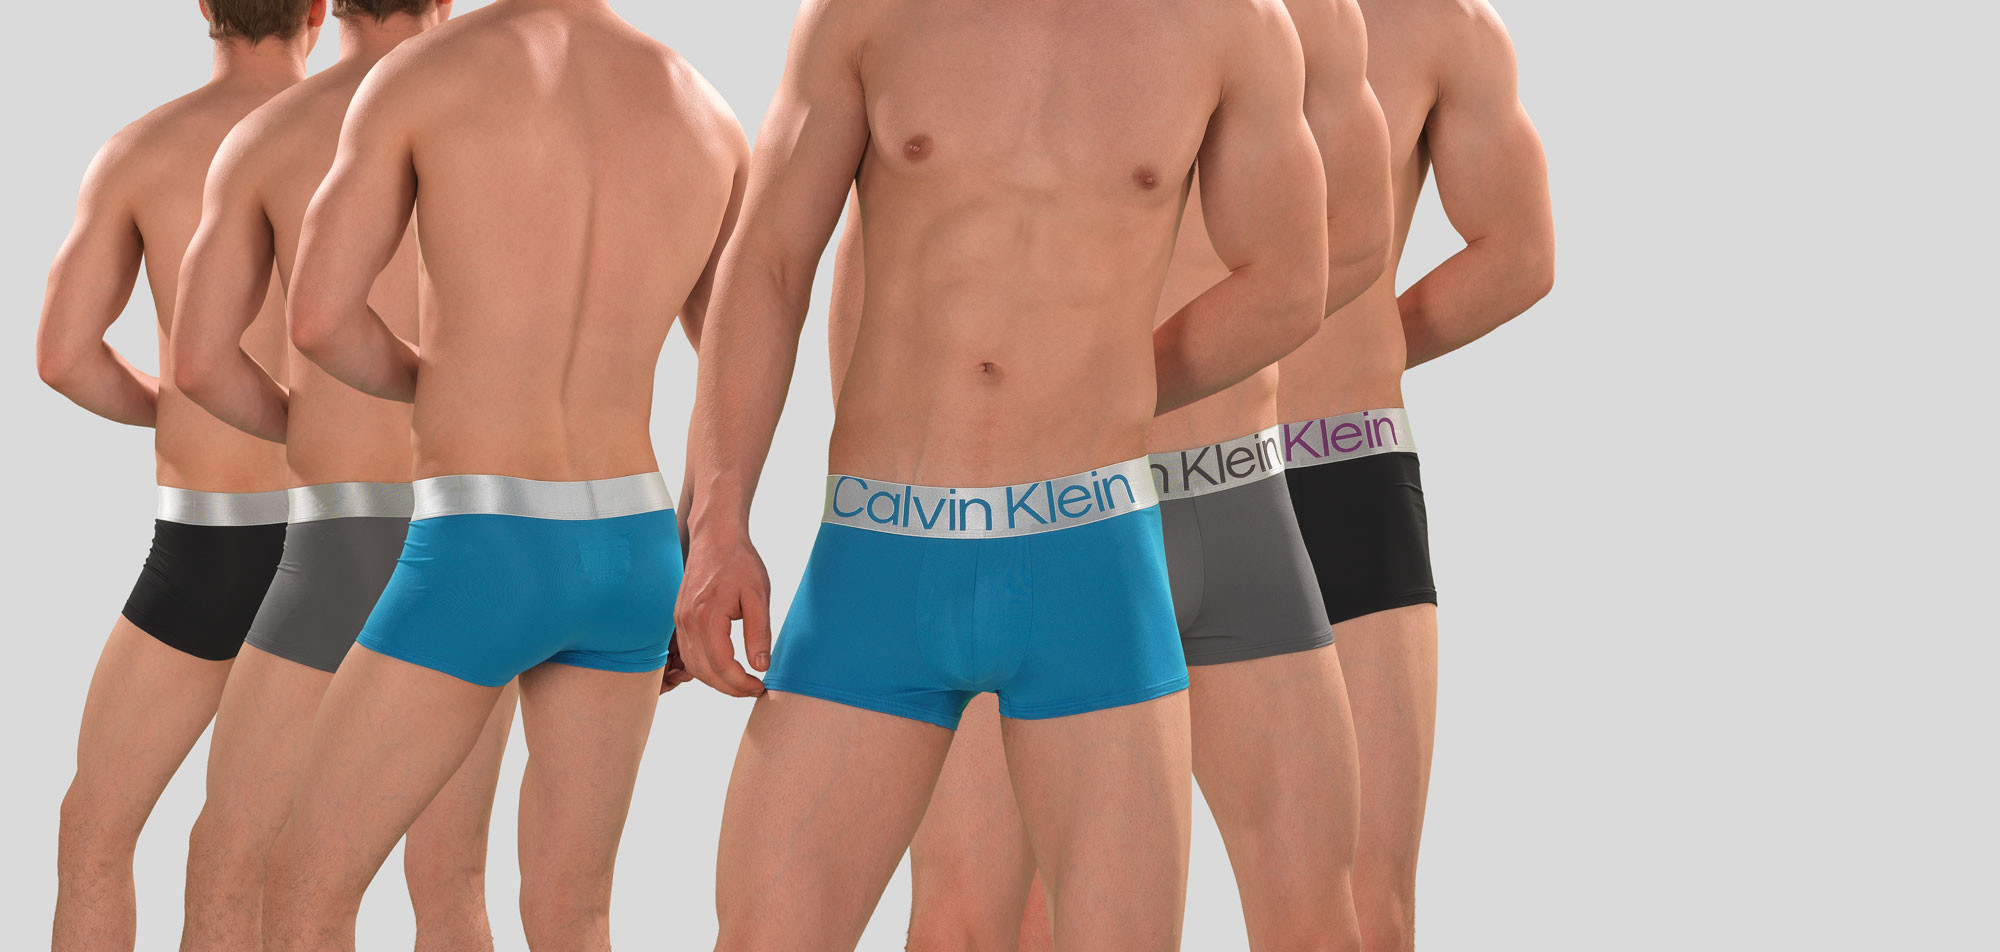 Calvin Klein Low Rise Trunk 3-Pack NB3074A Microfiber Reconsidered Steel, color Nee